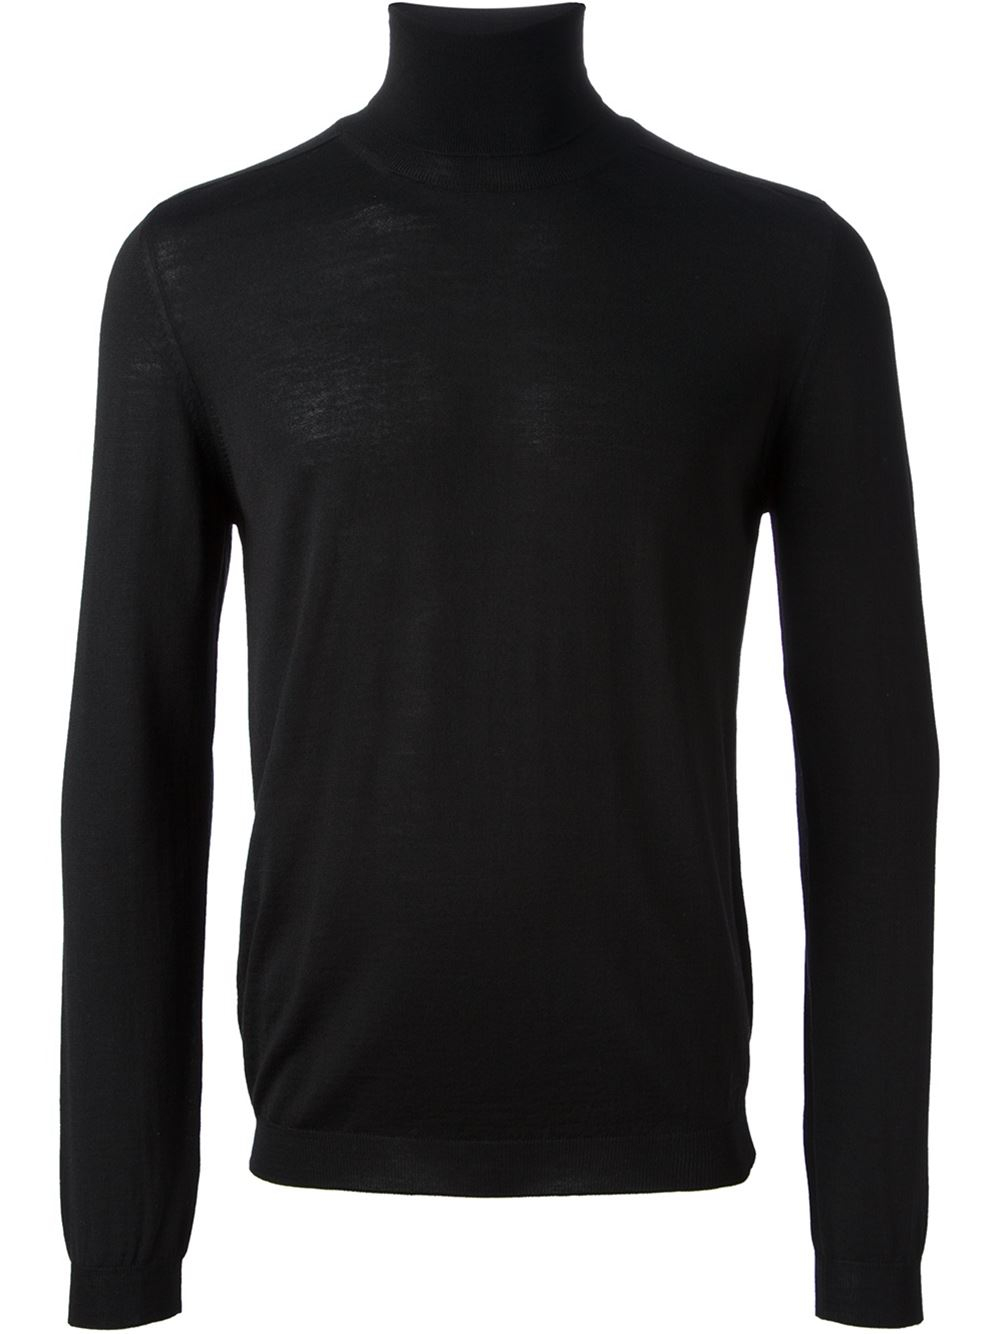 Lyst - Gucci Turtle Neck Sweater in Black for Men